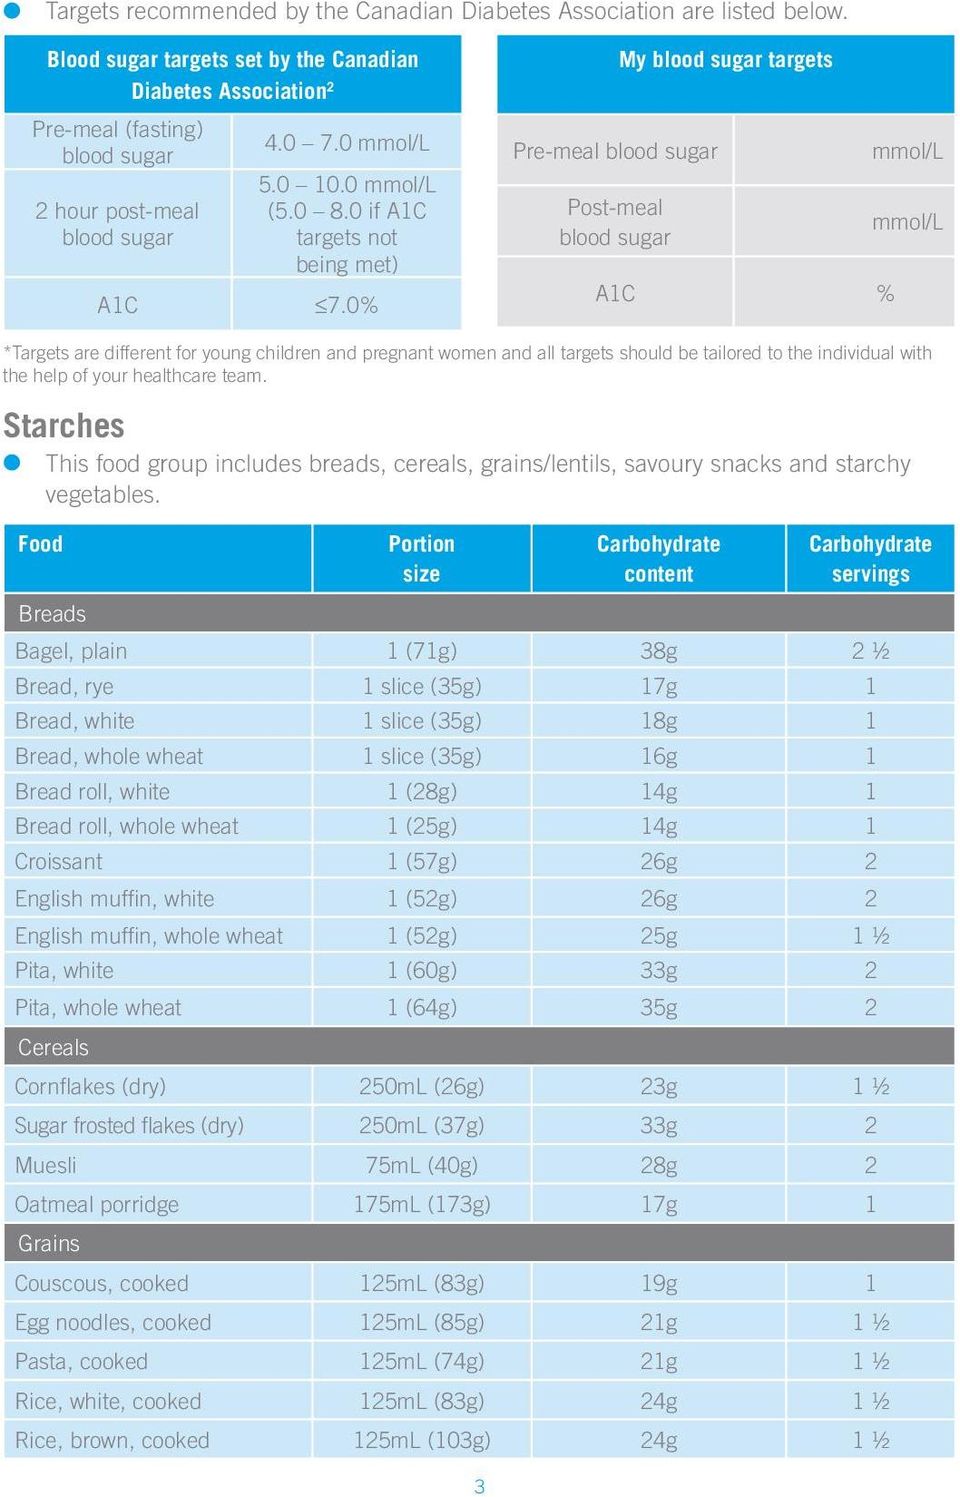 0% My blood sugar targets Pre-meal blood sugar mmol/l Post-meal blood sugar A1C % mmol/l *Targets are different for young children and pregnant women and all targets should be tailored to the